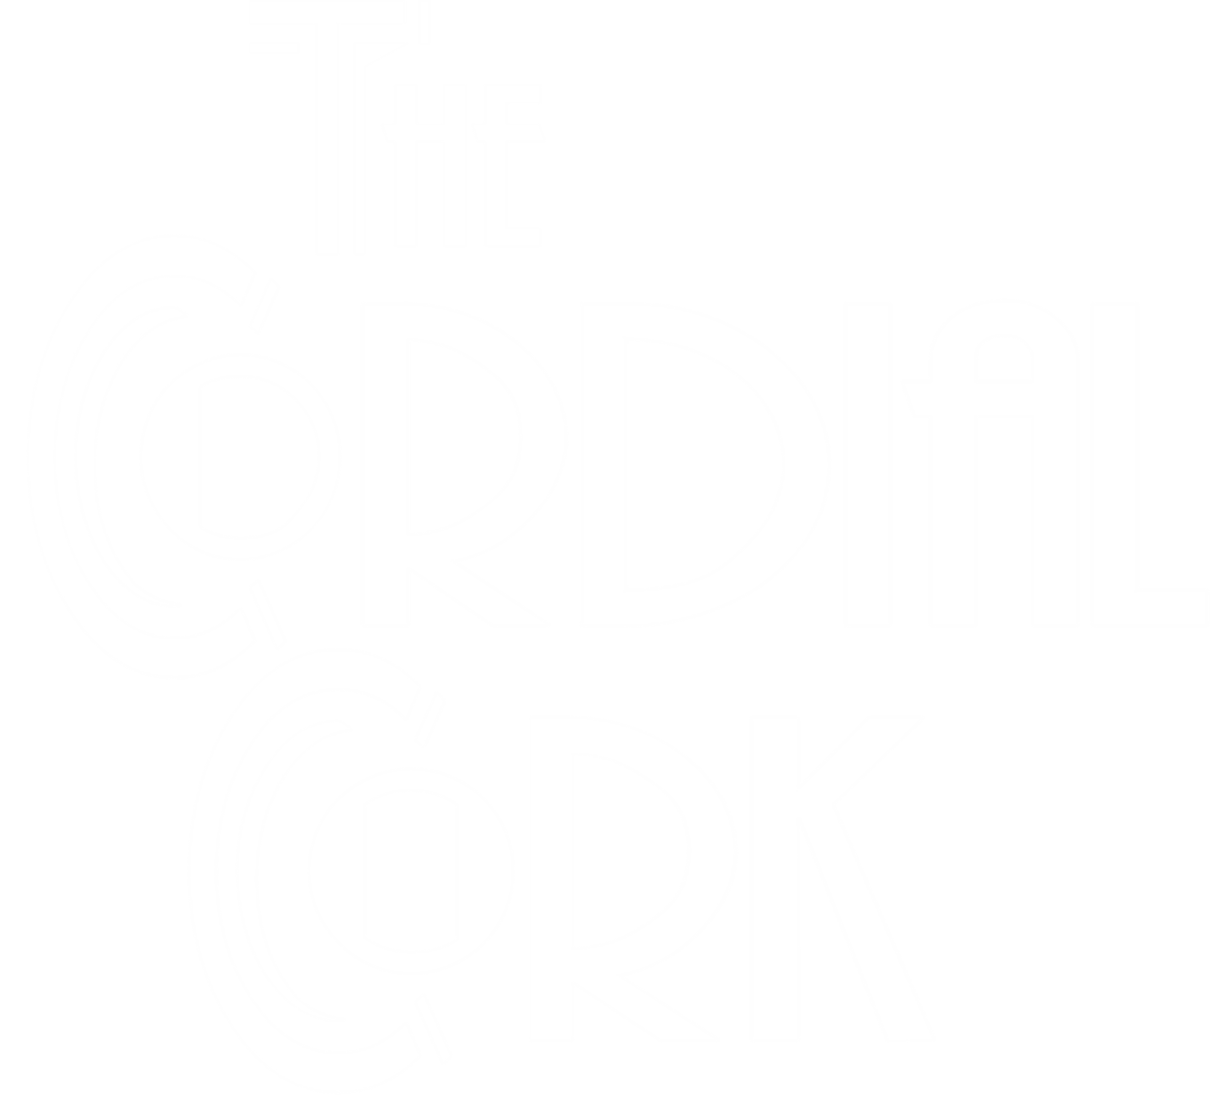 The Cordial Cork